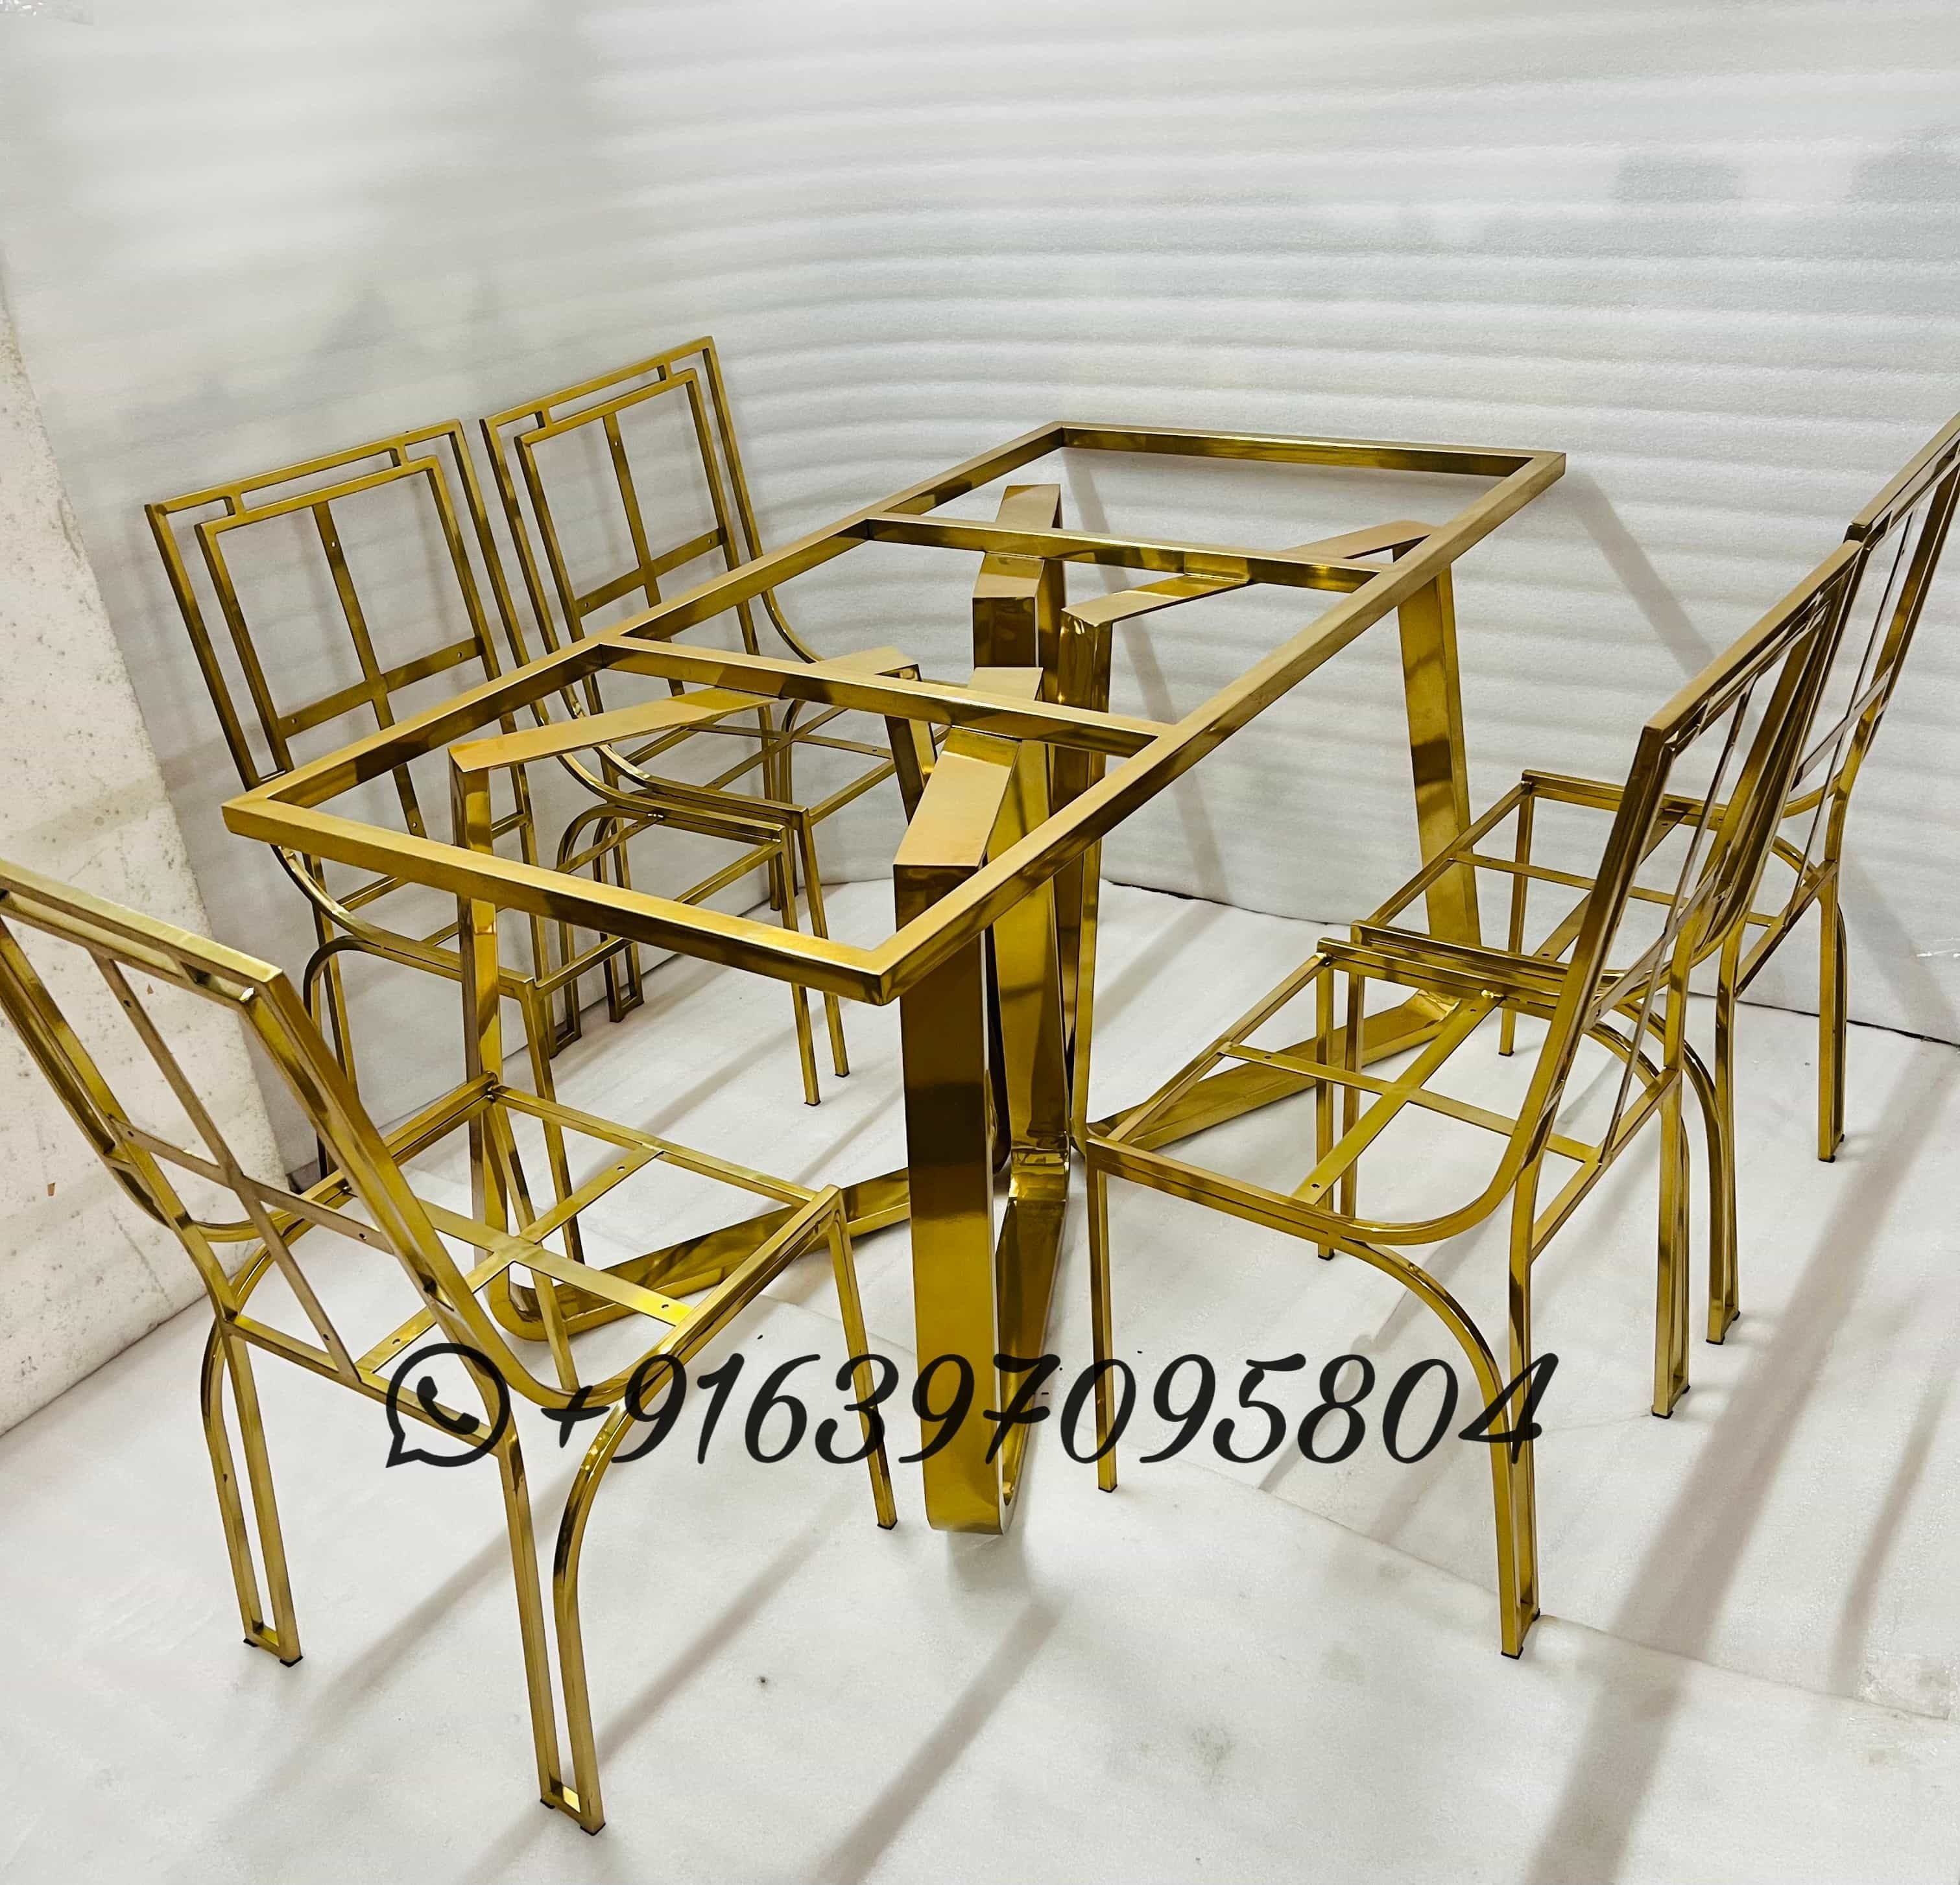 Dinning table set with chairs in stainless steel frames only